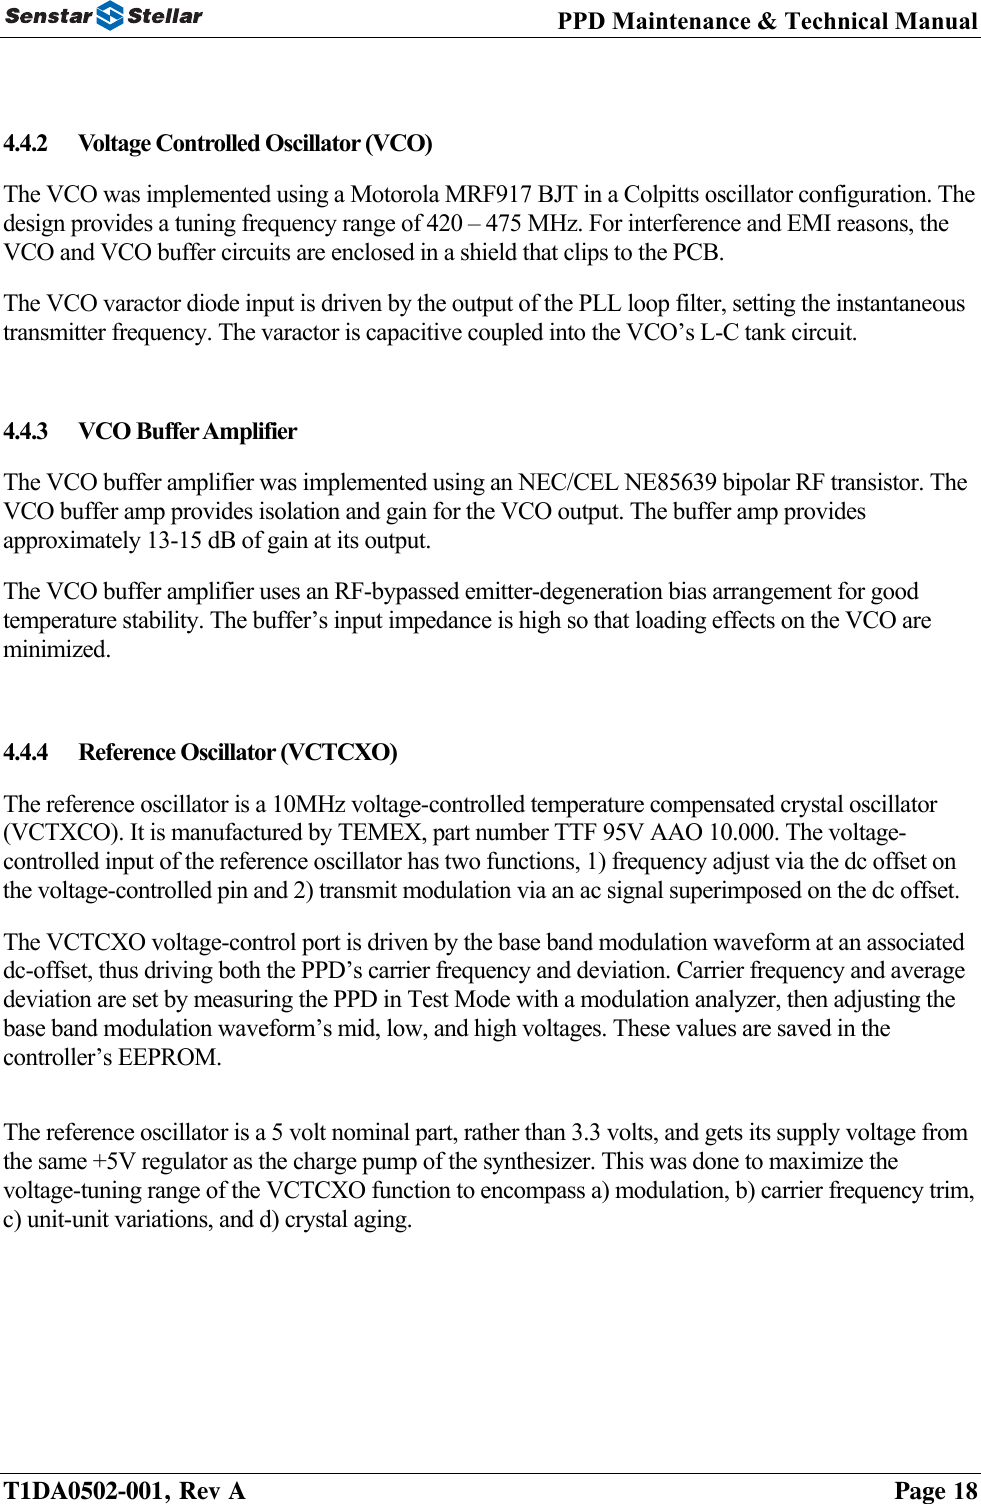 PPD Maintenance &amp; Technical Manual   4.4.2 Voltage Controlled Oscillator (VCO) The VCO was implemented using a Motorola MRF917 BJT in a Colpitts oscillator configuration. The design provides a tuning frequency range of 420 – 475 MHz. For interference and EMI reasons, the VCO and VCO buffer circuits are enclosed in a shield that clips to the PCB.  The VCO varactor diode input is driven by the output of the PLL loop filter, setting the instantaneous transmitter frequency. The varactor is capacitive coupled into the VCO’s L-C tank circuit.  4.4.3 VCO Buffer Amplifier The VCO buffer amplifier was implemented using an NEC/CEL NE85639 bipolar RF transistor. The VCO buffer amp provides isolation and gain for the VCO output. The buffer amp provides approximately 13-15 dB of gain at its output.  The VCO buffer amplifier uses an RF-bypassed emitter-degeneration bias arrangement for good temperature stability. The buffer’s input impedance is high so that loading effects on the VCO are minimized.   4.4.4  Reference Oscillator (VCTCXO) The reference oscillator is a 10MHz voltage-controlled temperature compensated crystal oscillator (VCTXCO). It is manufactured by TEMEX, part number TTF 95V AAO 10.000. The voltage-controlled input of the reference oscillator has two functions, 1) frequency adjust via the dc offset on the voltage-controlled pin and 2) transmit modulation via an ac signal superimposed on the dc offset. The VCTCXO voltage-control port is driven by the base band modulation waveform at an associated dc-offset, thus driving both the PPD’s carrier frequency and deviation. Carrier frequency and average deviation are set by measuring the PPD in Test Mode with a modulation analyzer, then adjusting the base band modulation waveform’s mid, low, and high voltages. These values are saved in the controller’s EEPROM.   The reference oscillator is a 5 volt nominal part, rather than 3.3 volts, and gets its supply voltage from the same +5V regulator as the charge pump of the synthesizer. This was done to maximize the voltage-tuning range of the VCTCXO function to encompass a) modulation, b) carrier frequency trim, c) unit-unit variations, and d) crystal aging.        T1DA0502-001, Rev A    Page 18 